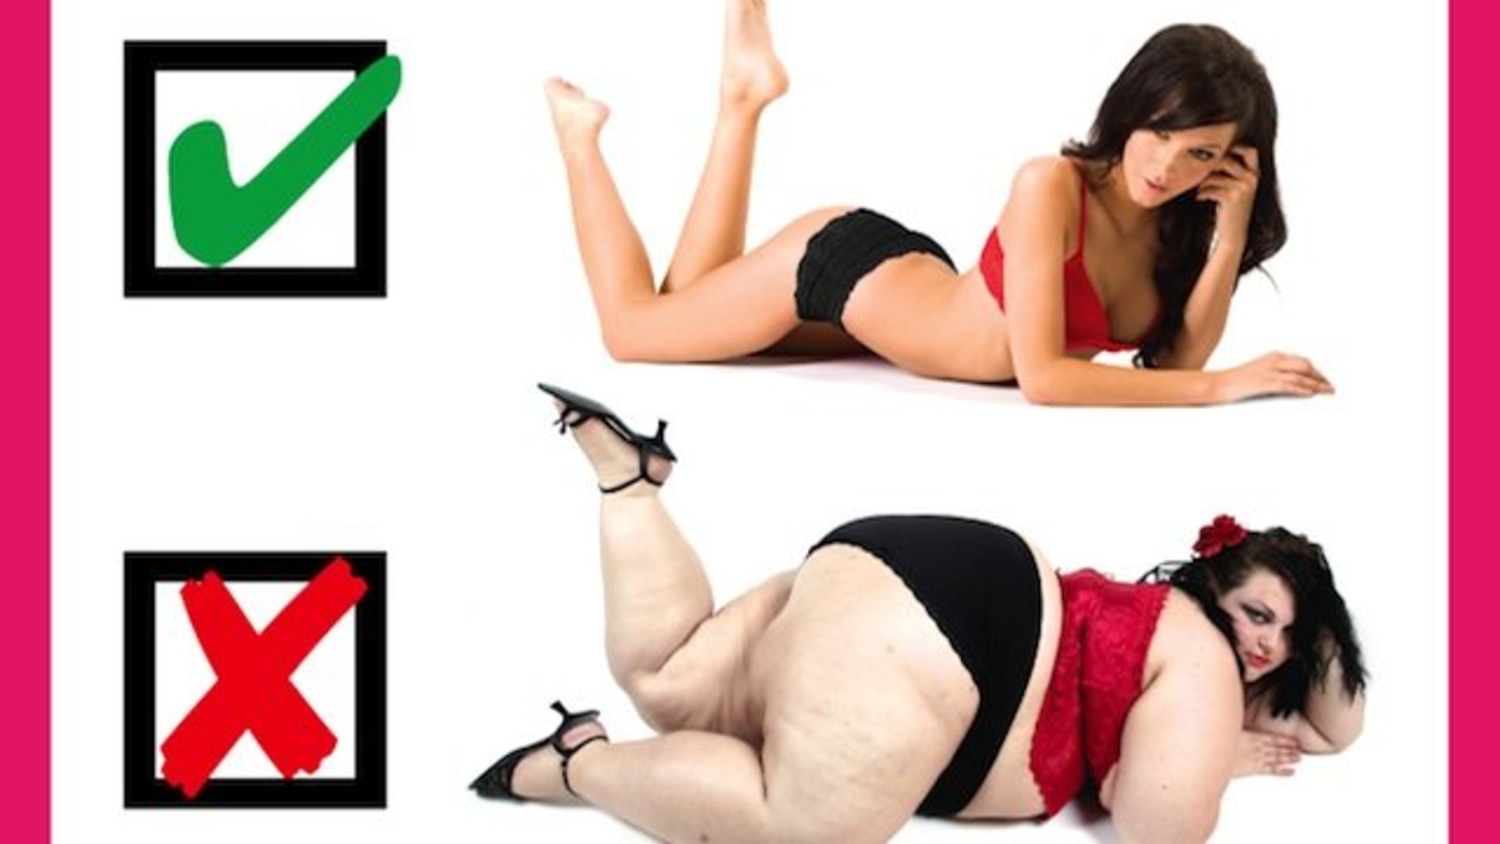 Adultery website encourages cheating on your fat wife